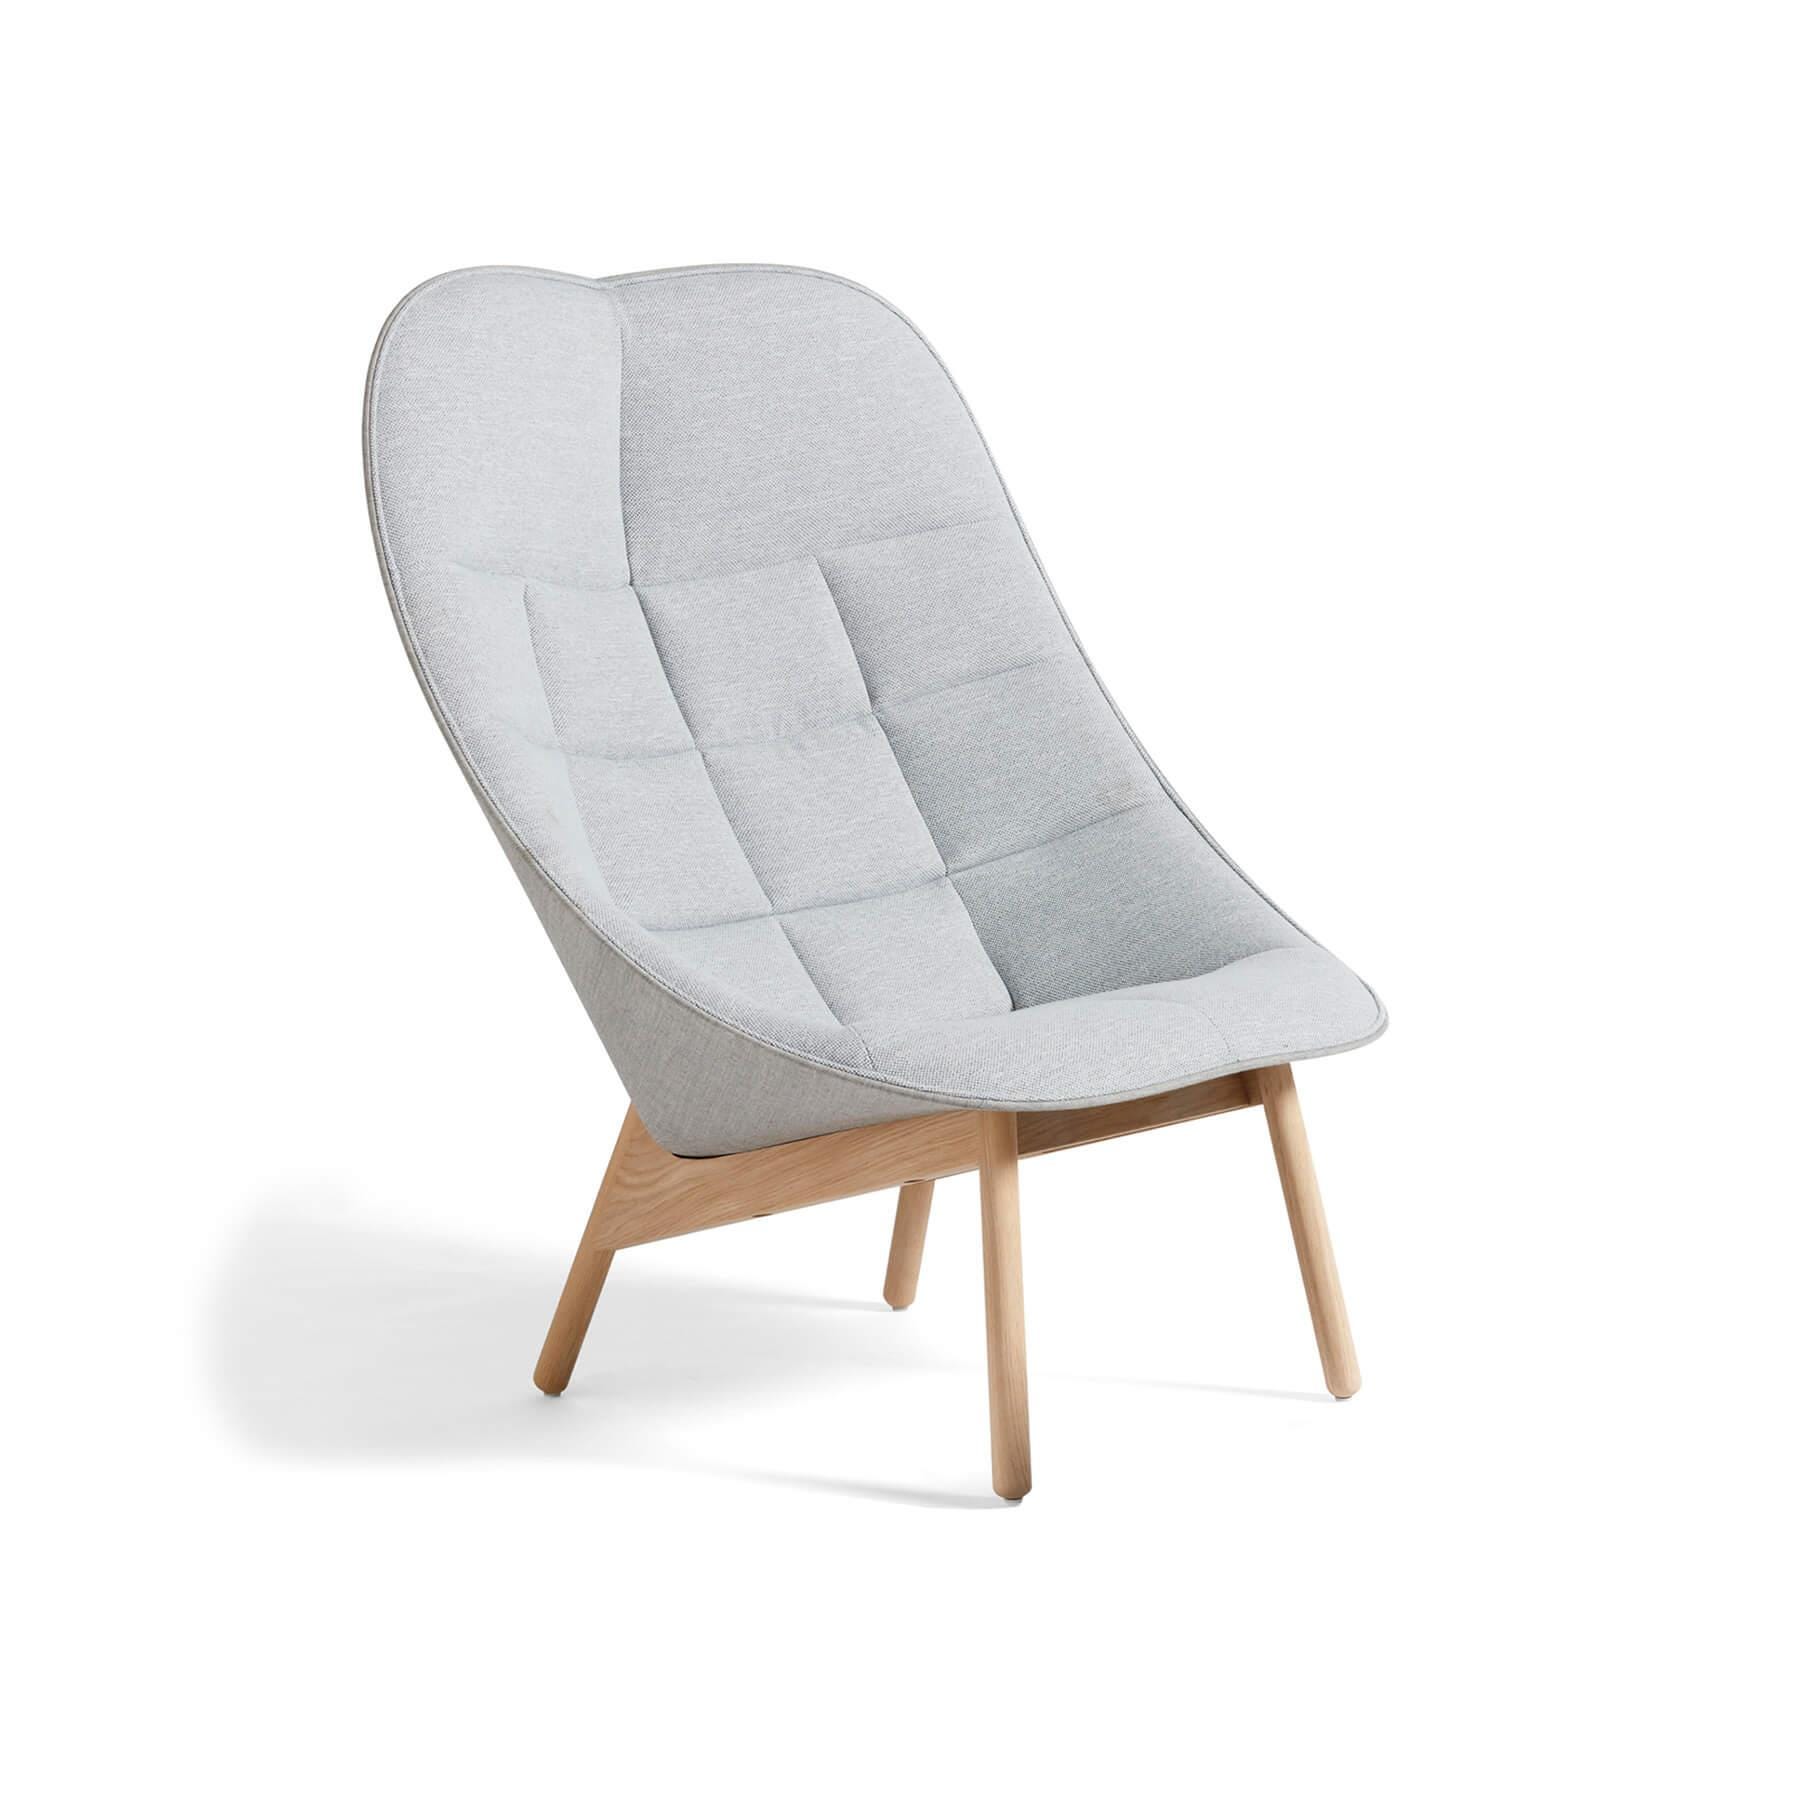 Hay Uchiwa Lounge Chair Quilted Mode 002 Remix 123 Oak Base No Ottoman Grey Designer Furniture From Holloways Of Ludlow